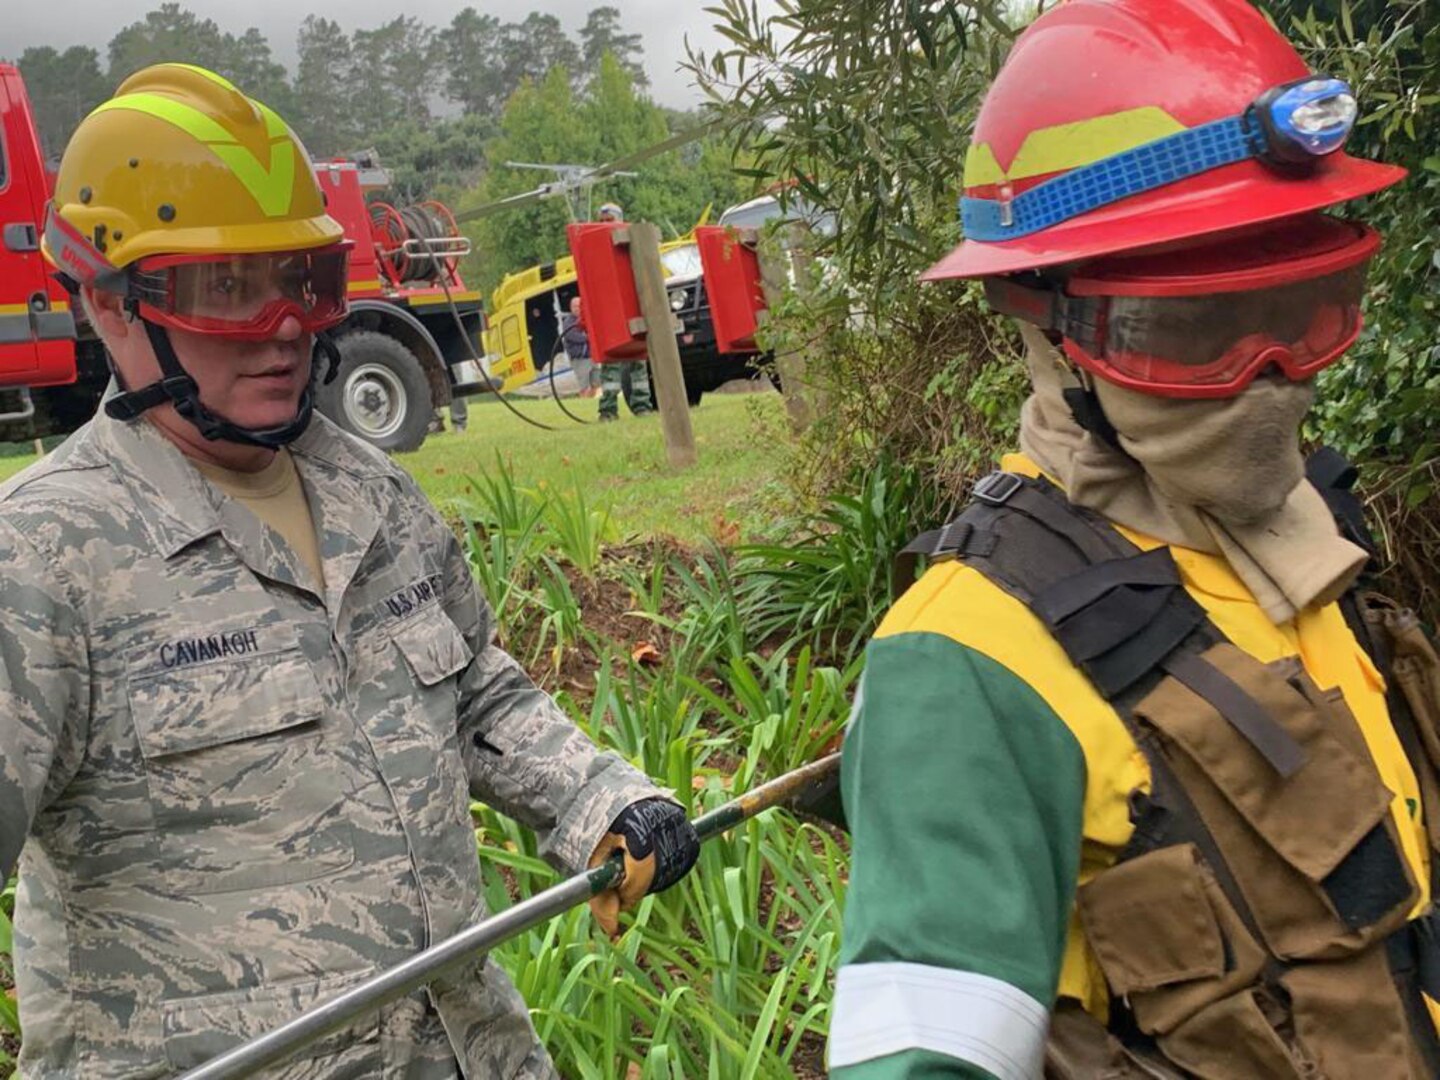 U.S., Mexican Civilian First Responders Complete Water Search and Rescue  Training > U.S. Northern Command > Article